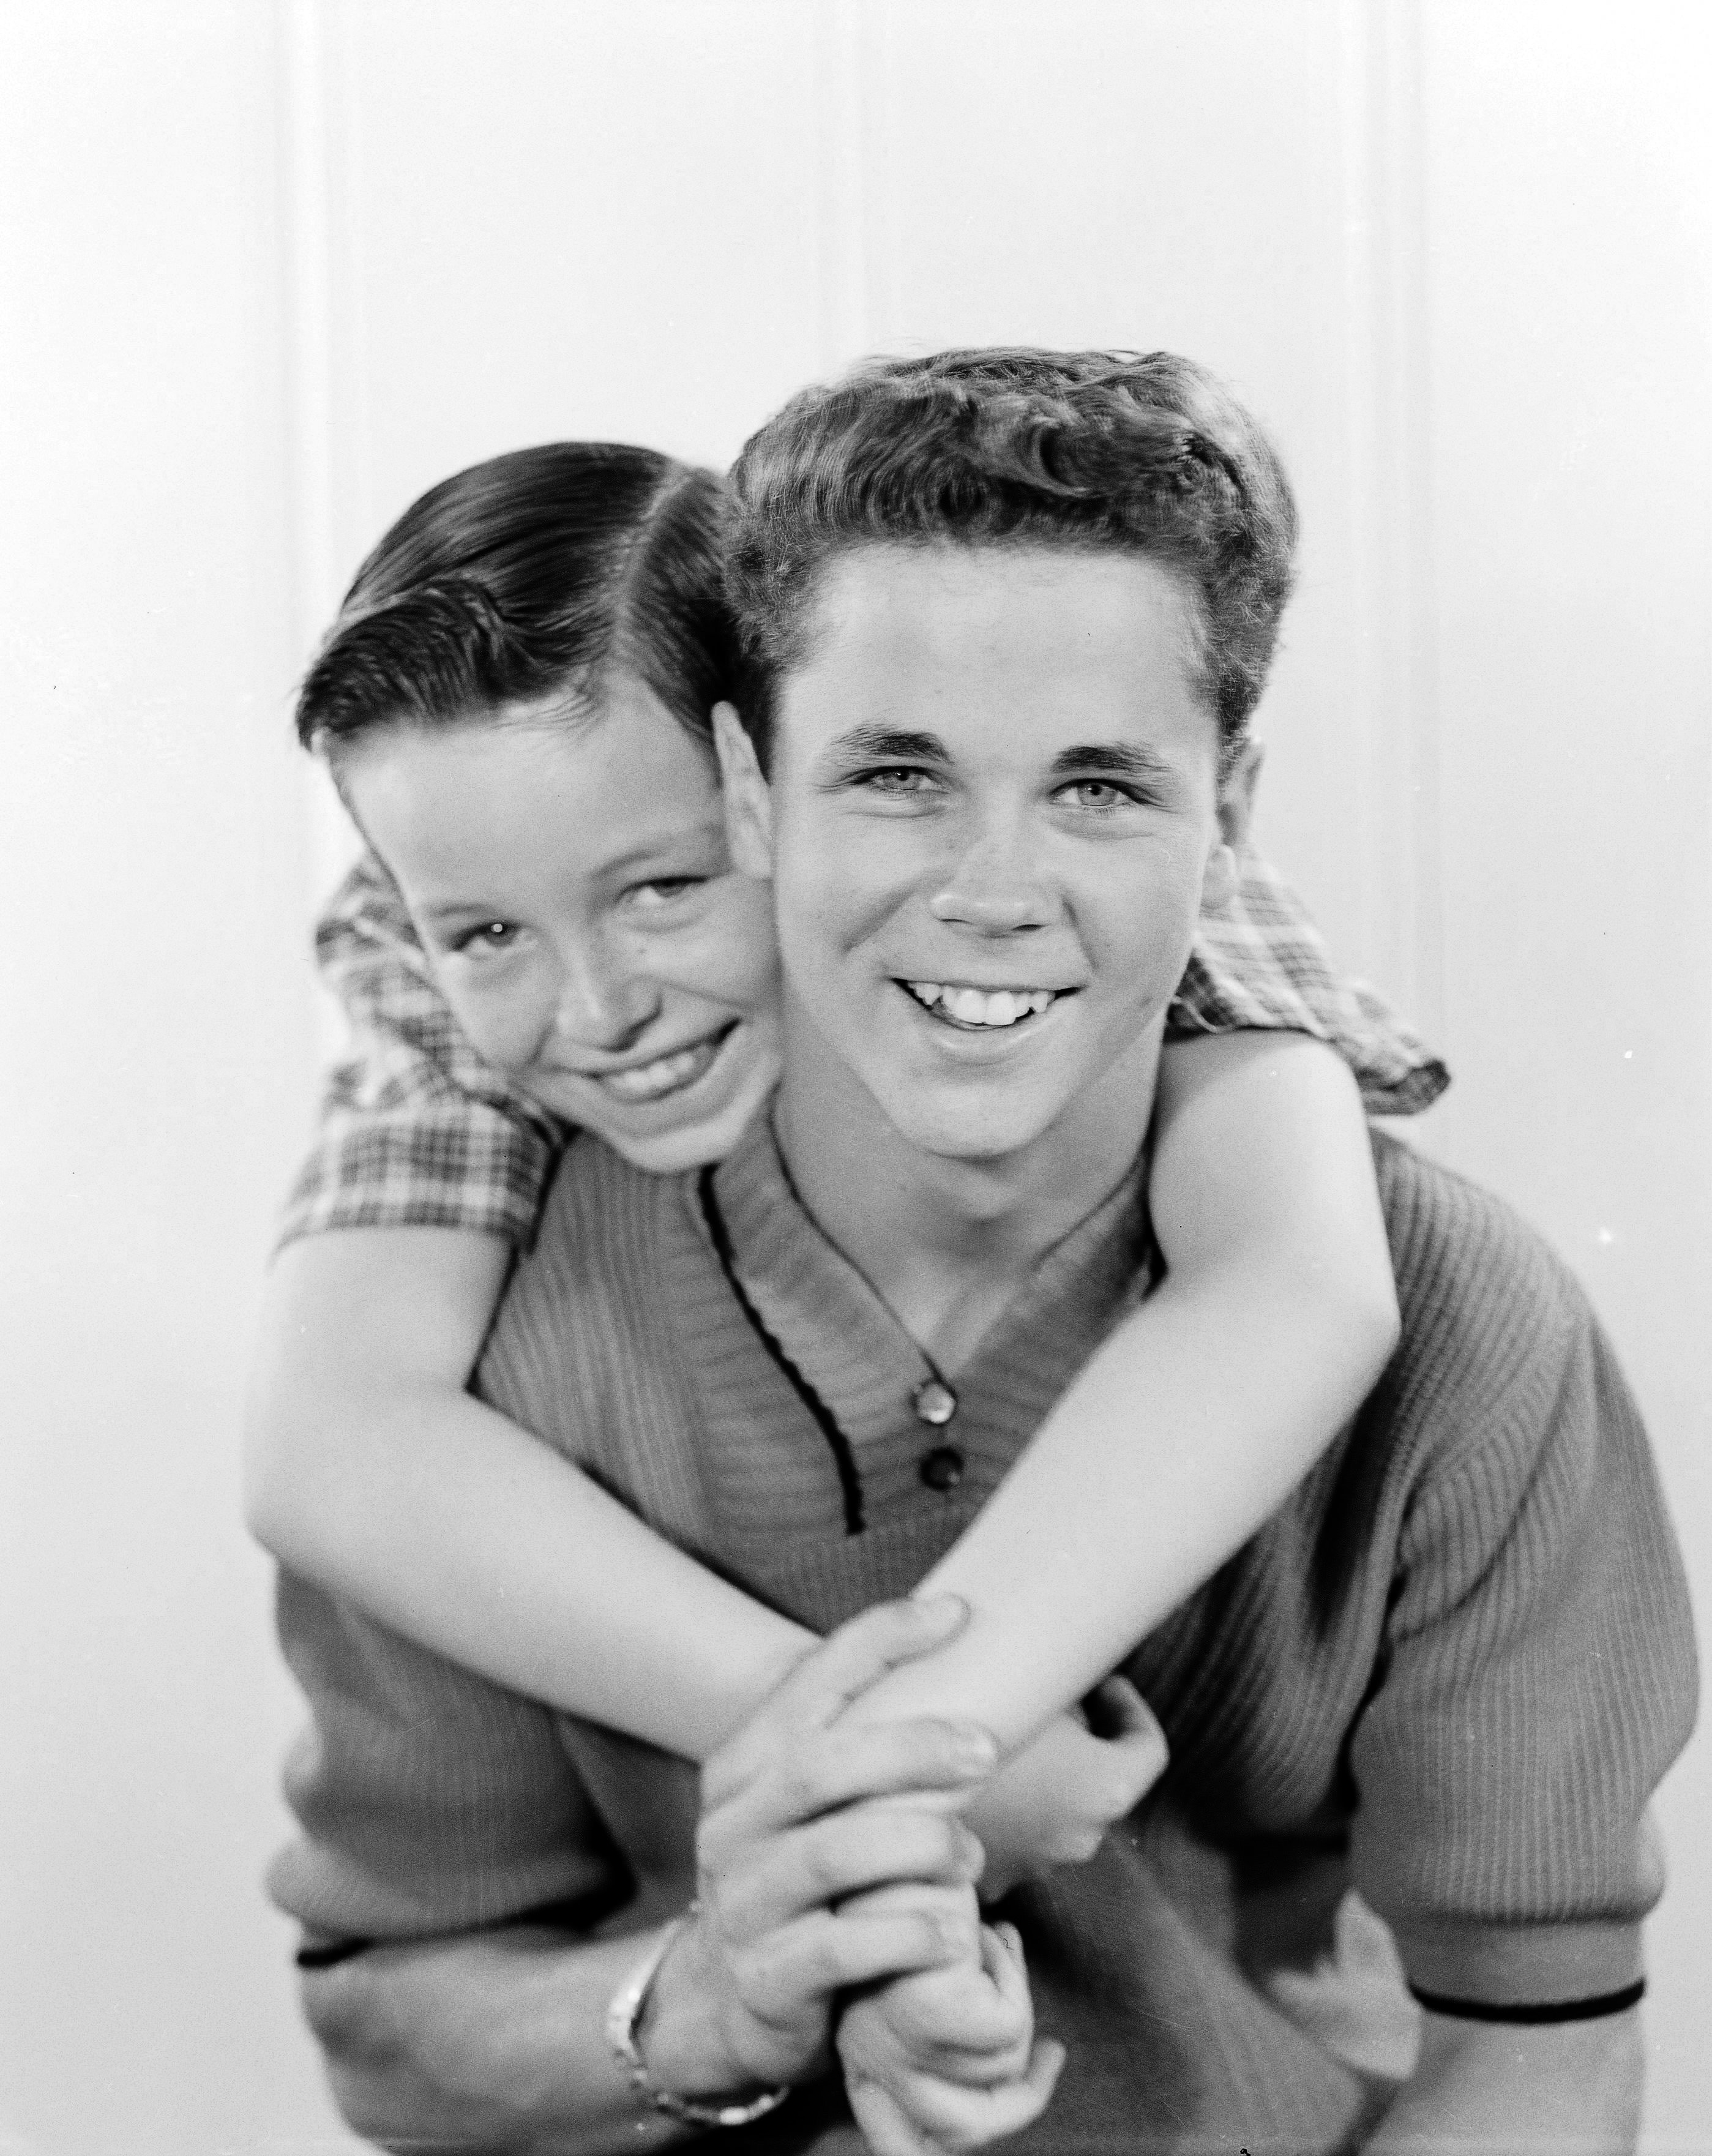 'Leave It to Beaver' co-stars Tony Dow and Jerry Mathers were just as close as their onscreen characters Wally and Beaver.